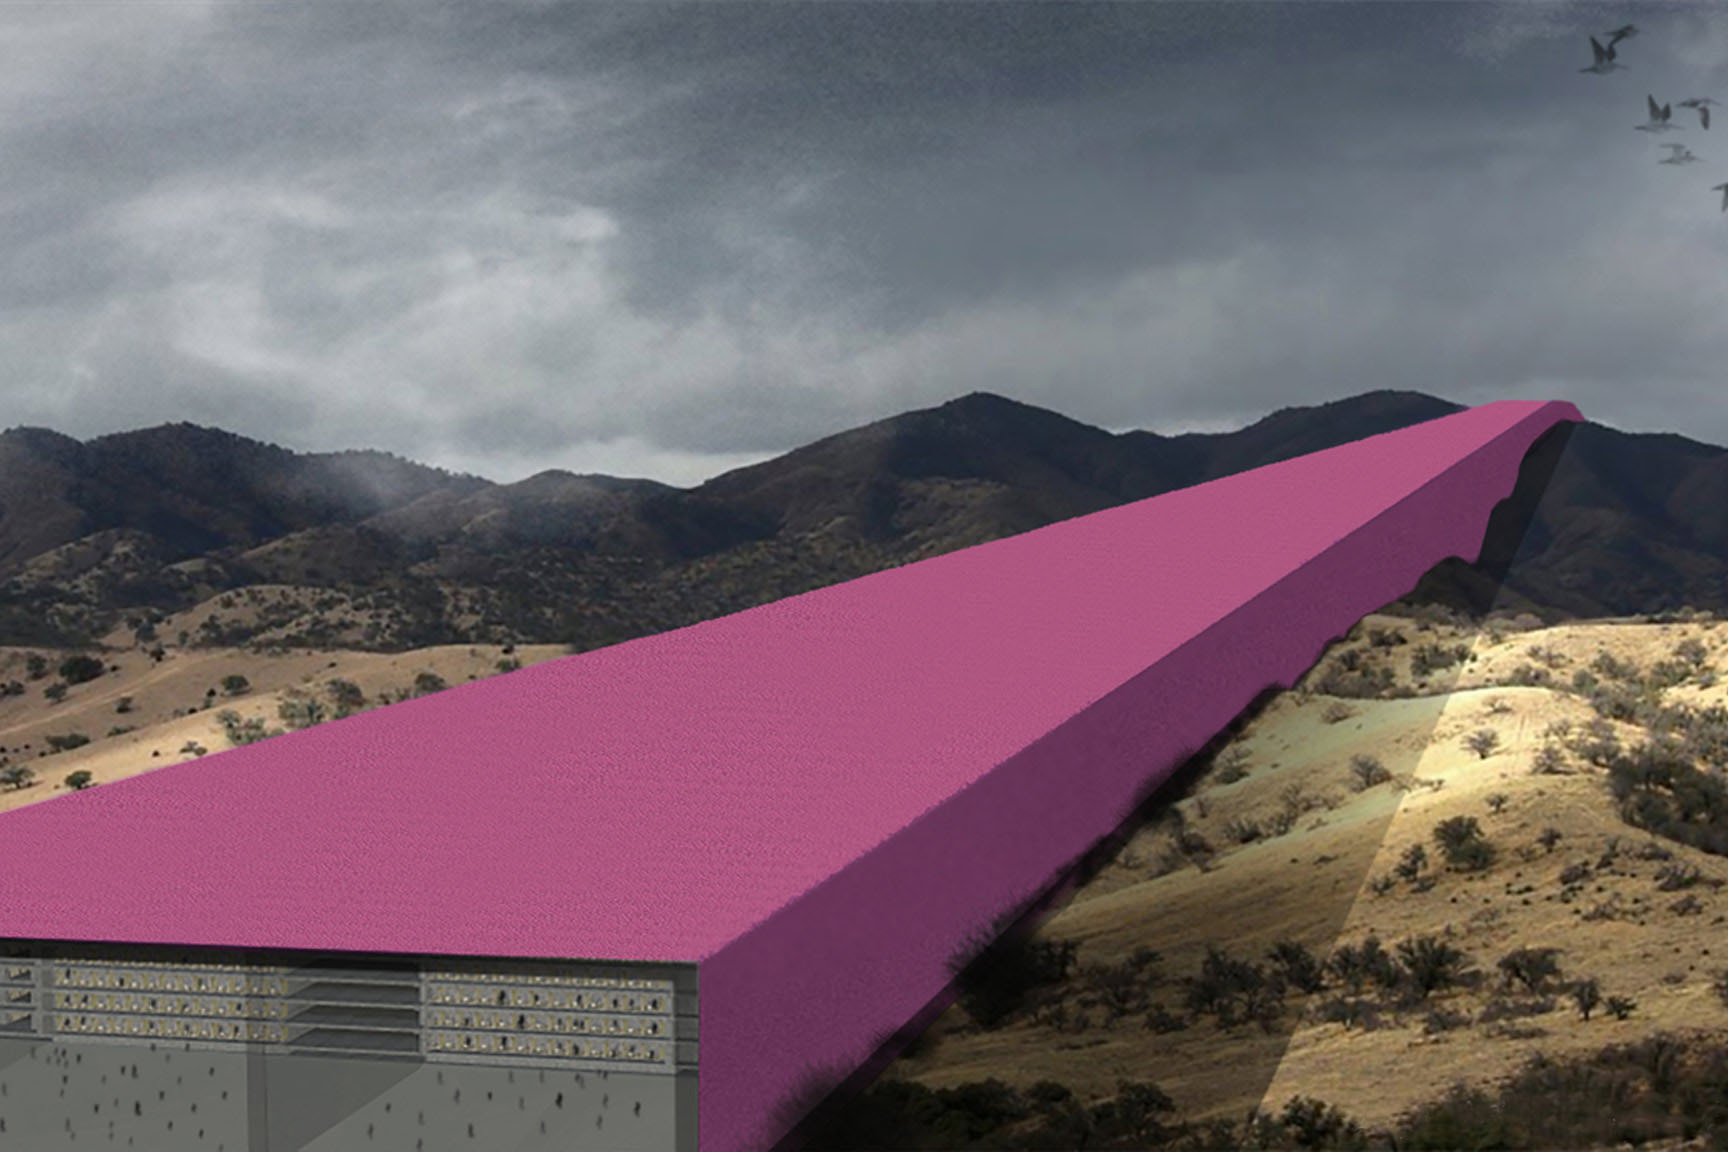 Through a virtual architectural design, a UConn professor takes an ironic look at the relationship between border walls and the philosophical concept of a state. (Image by Augustin Avalos, Estudio Pi S.C., Hassanaly Ladha)